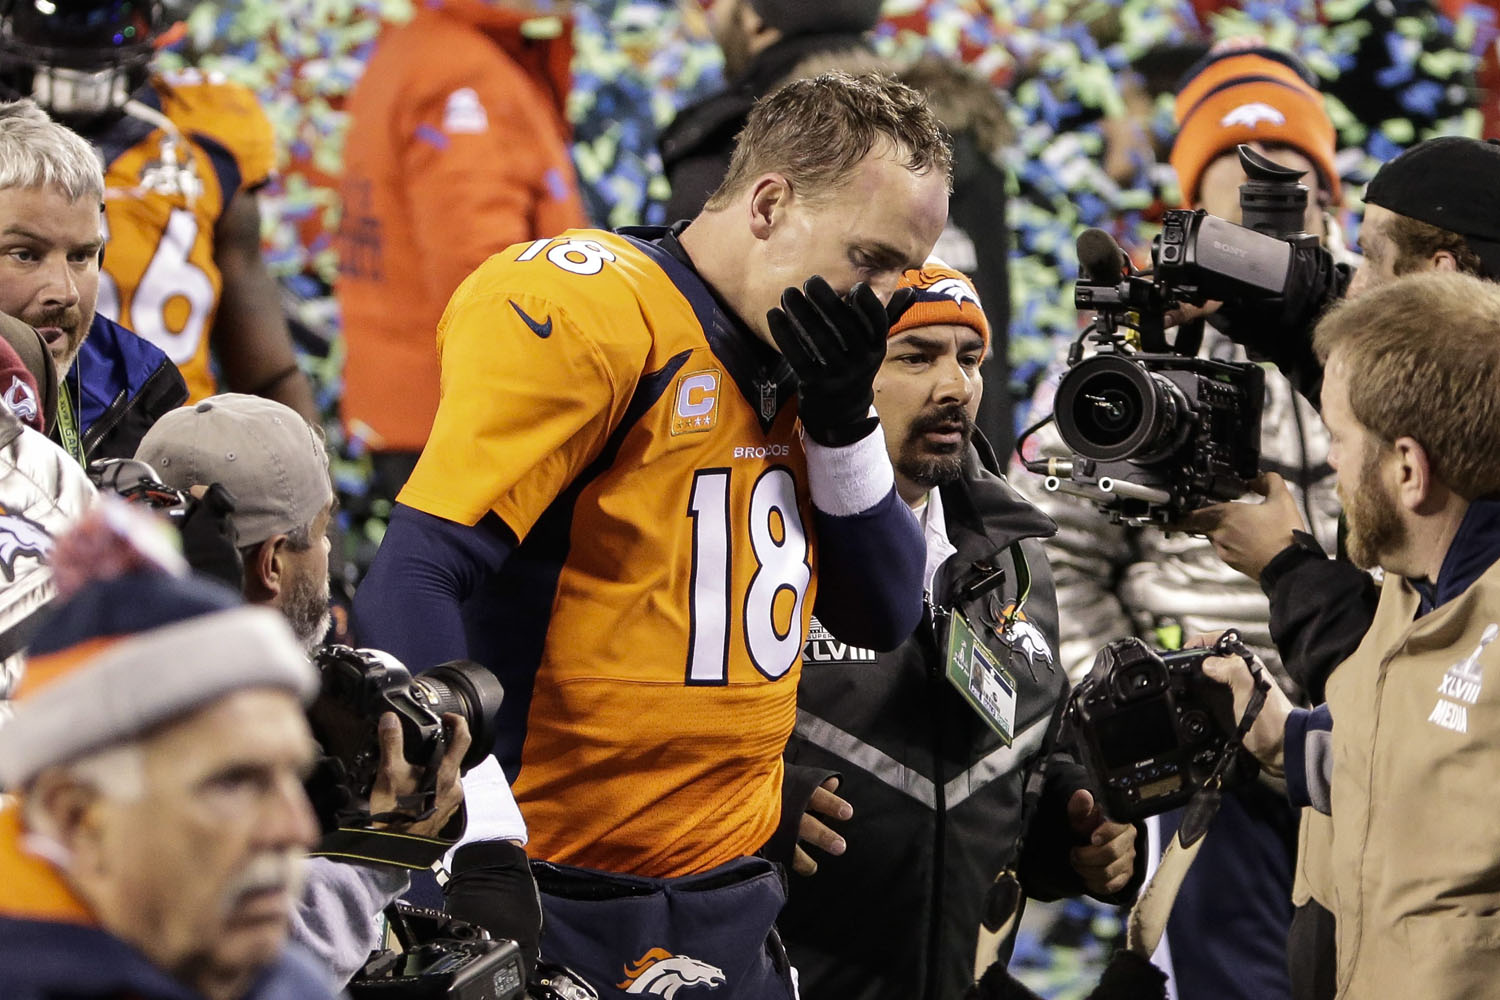 Feb. 2, 2014. Denver Broncos quarterback Peyton Manning at the end of Super Bowl XLVIII between the Denver Broncos and the Seattle Seahawks at the MetLife Stadium in East Rutherford, N.J.